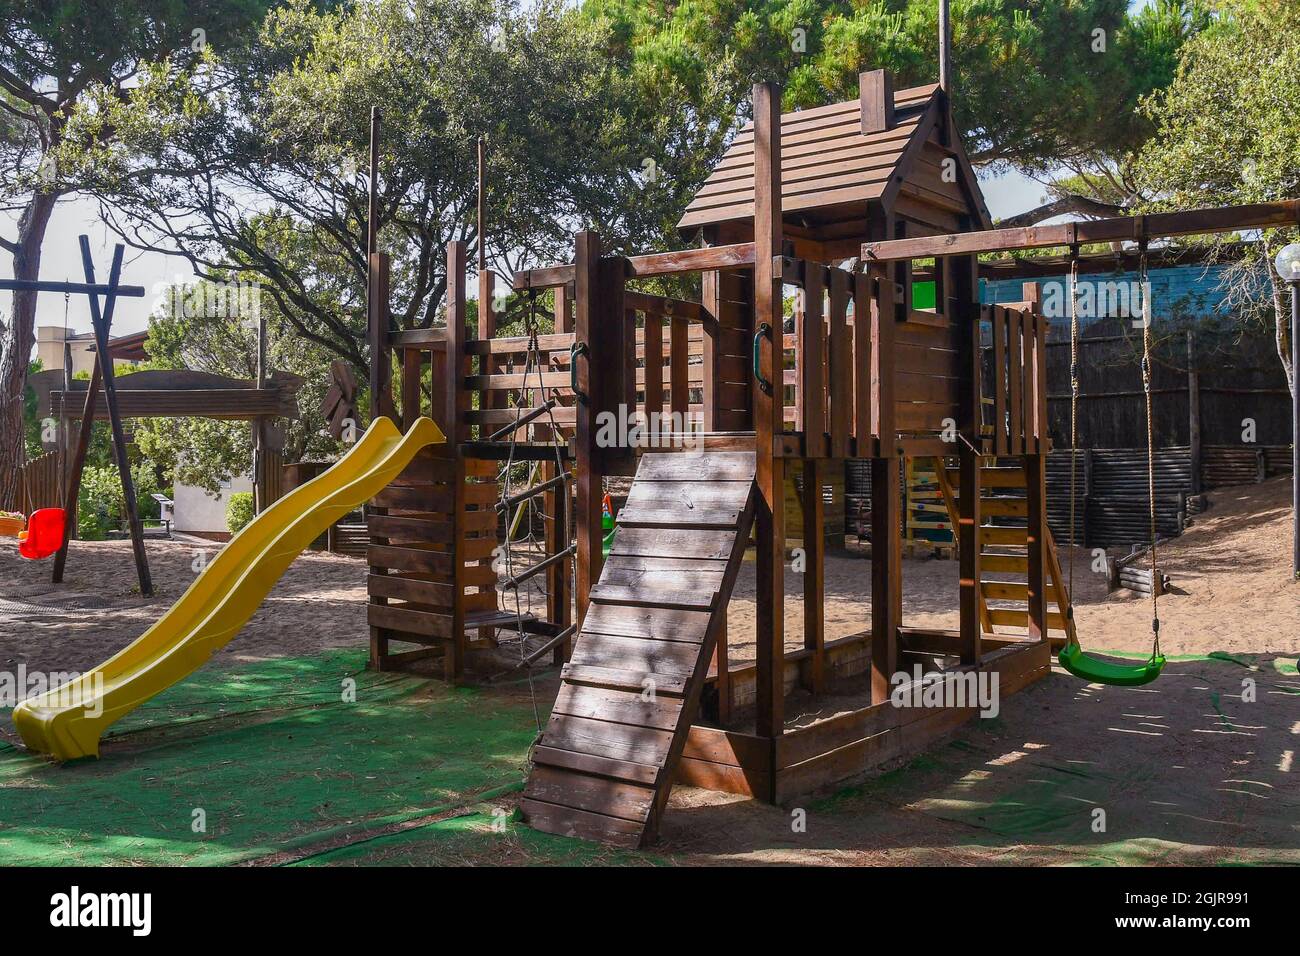 An empty children playground with slides, swings and various trails in a pine forest on the Tuscan coast, Castagneto Carducci, Livorno, Italy Stock Photo